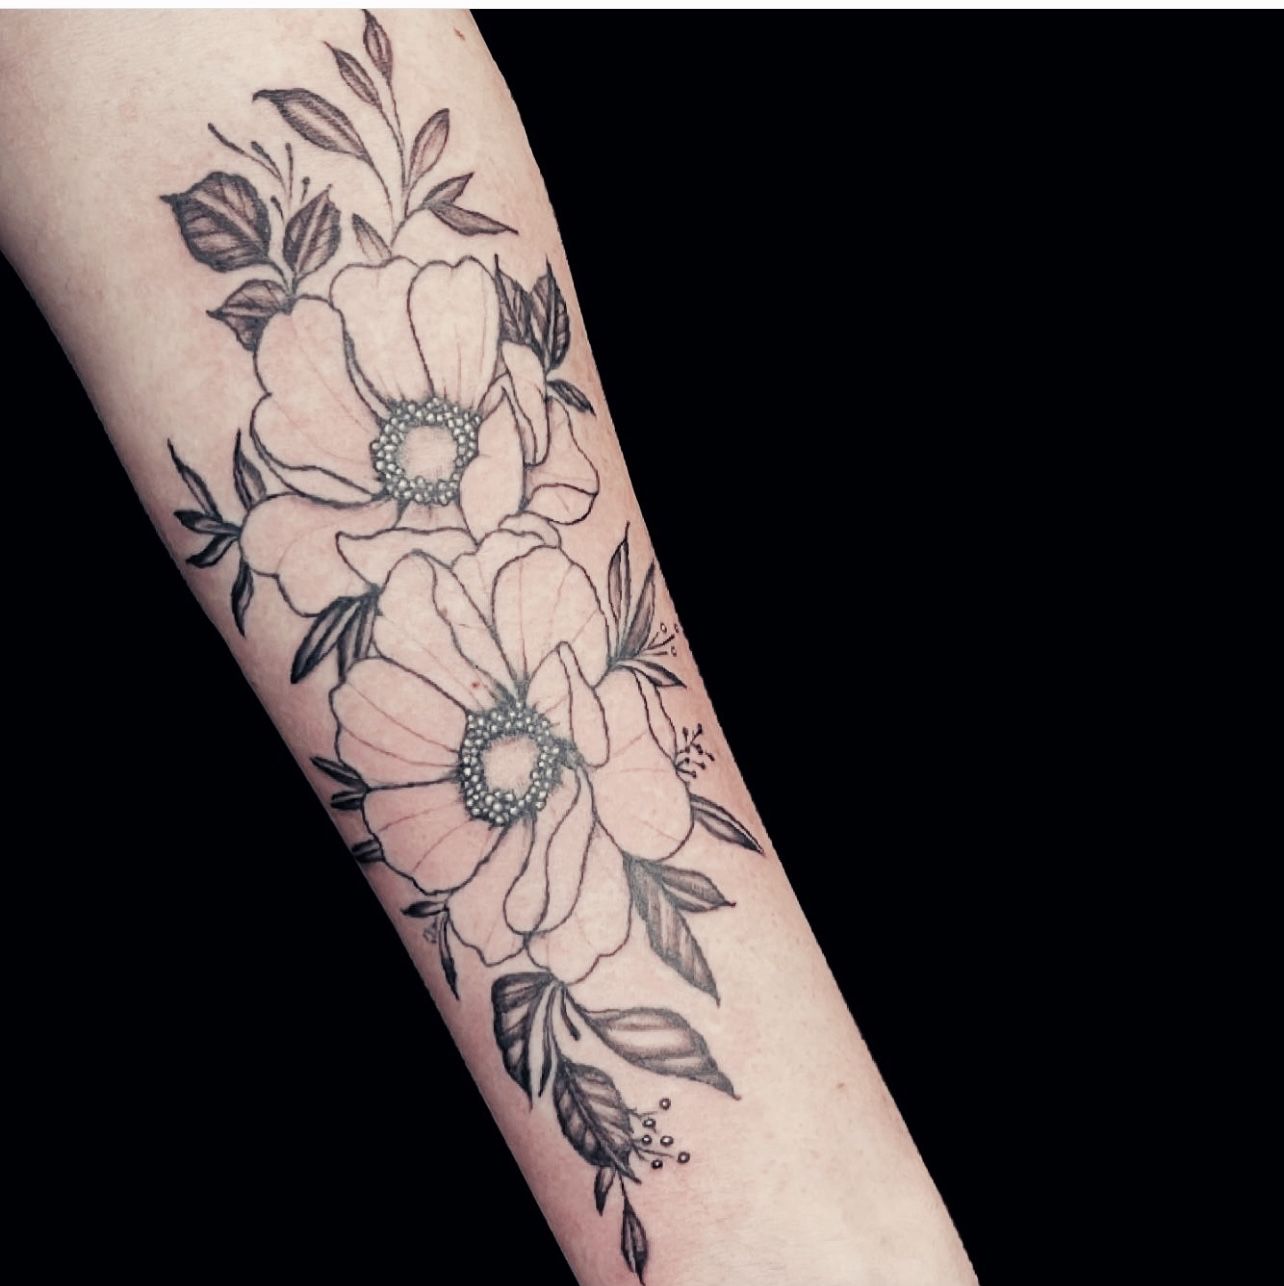 Bone Shaker Tattoos and Body Art  Some colour realism flowers Tom did the  other day tomquinert flowers flower nature colour floral shading  tattoo tattoos tattooing tattooist tattooed tat instatattoo ink  inked 